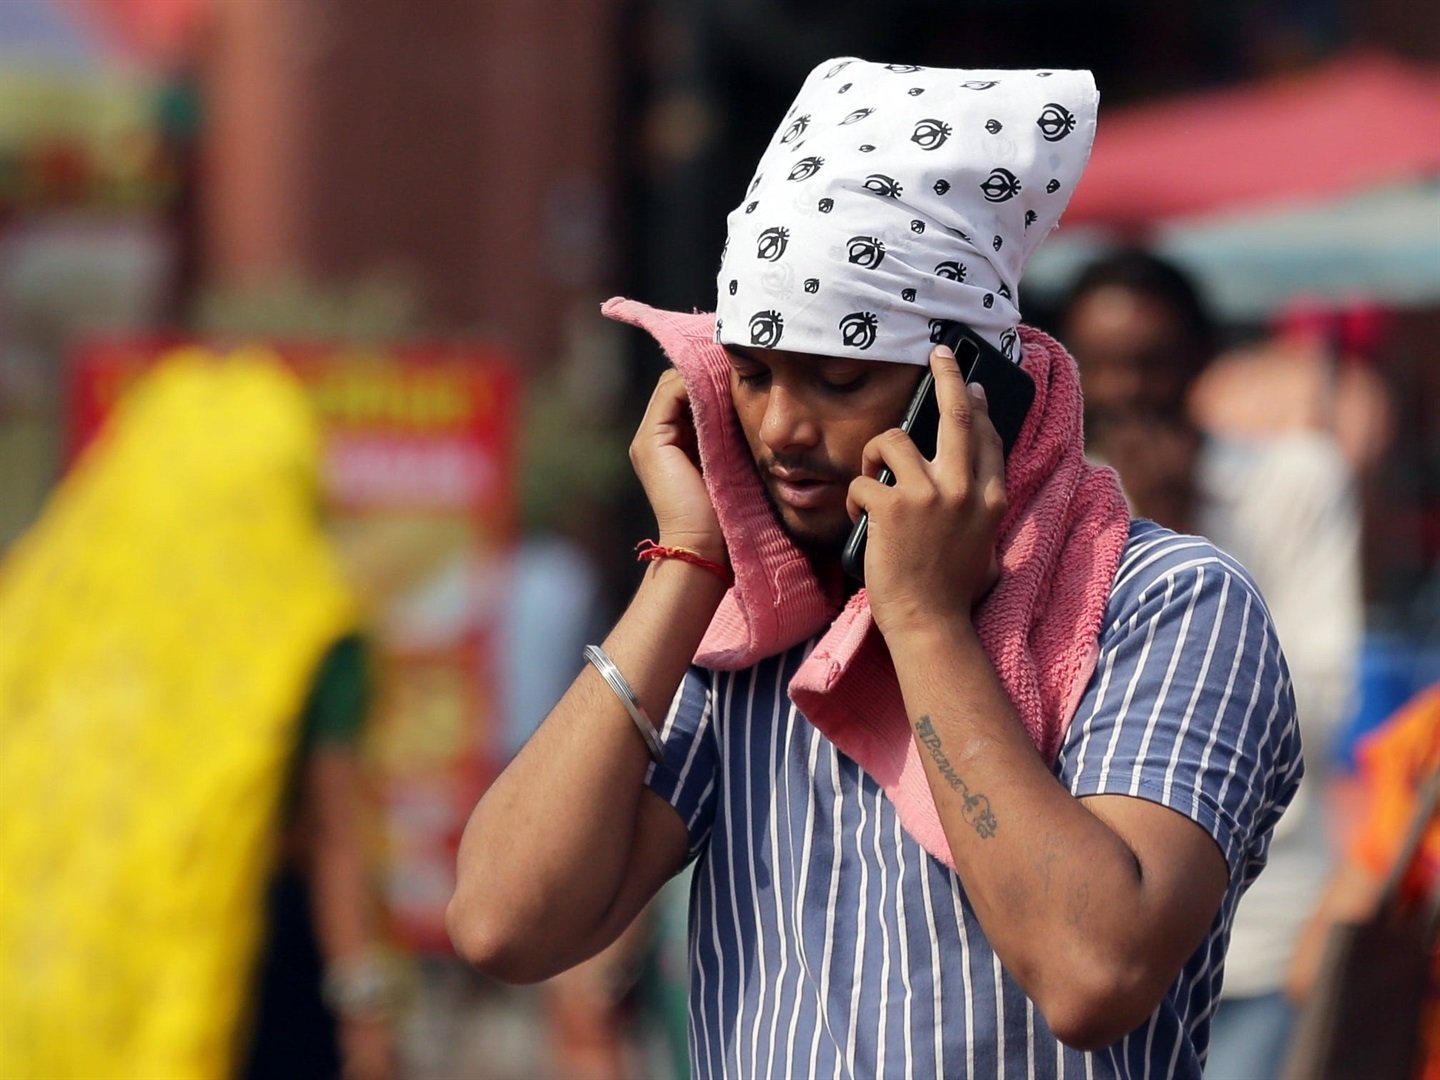 India is suffering amid an extreme heatwave.